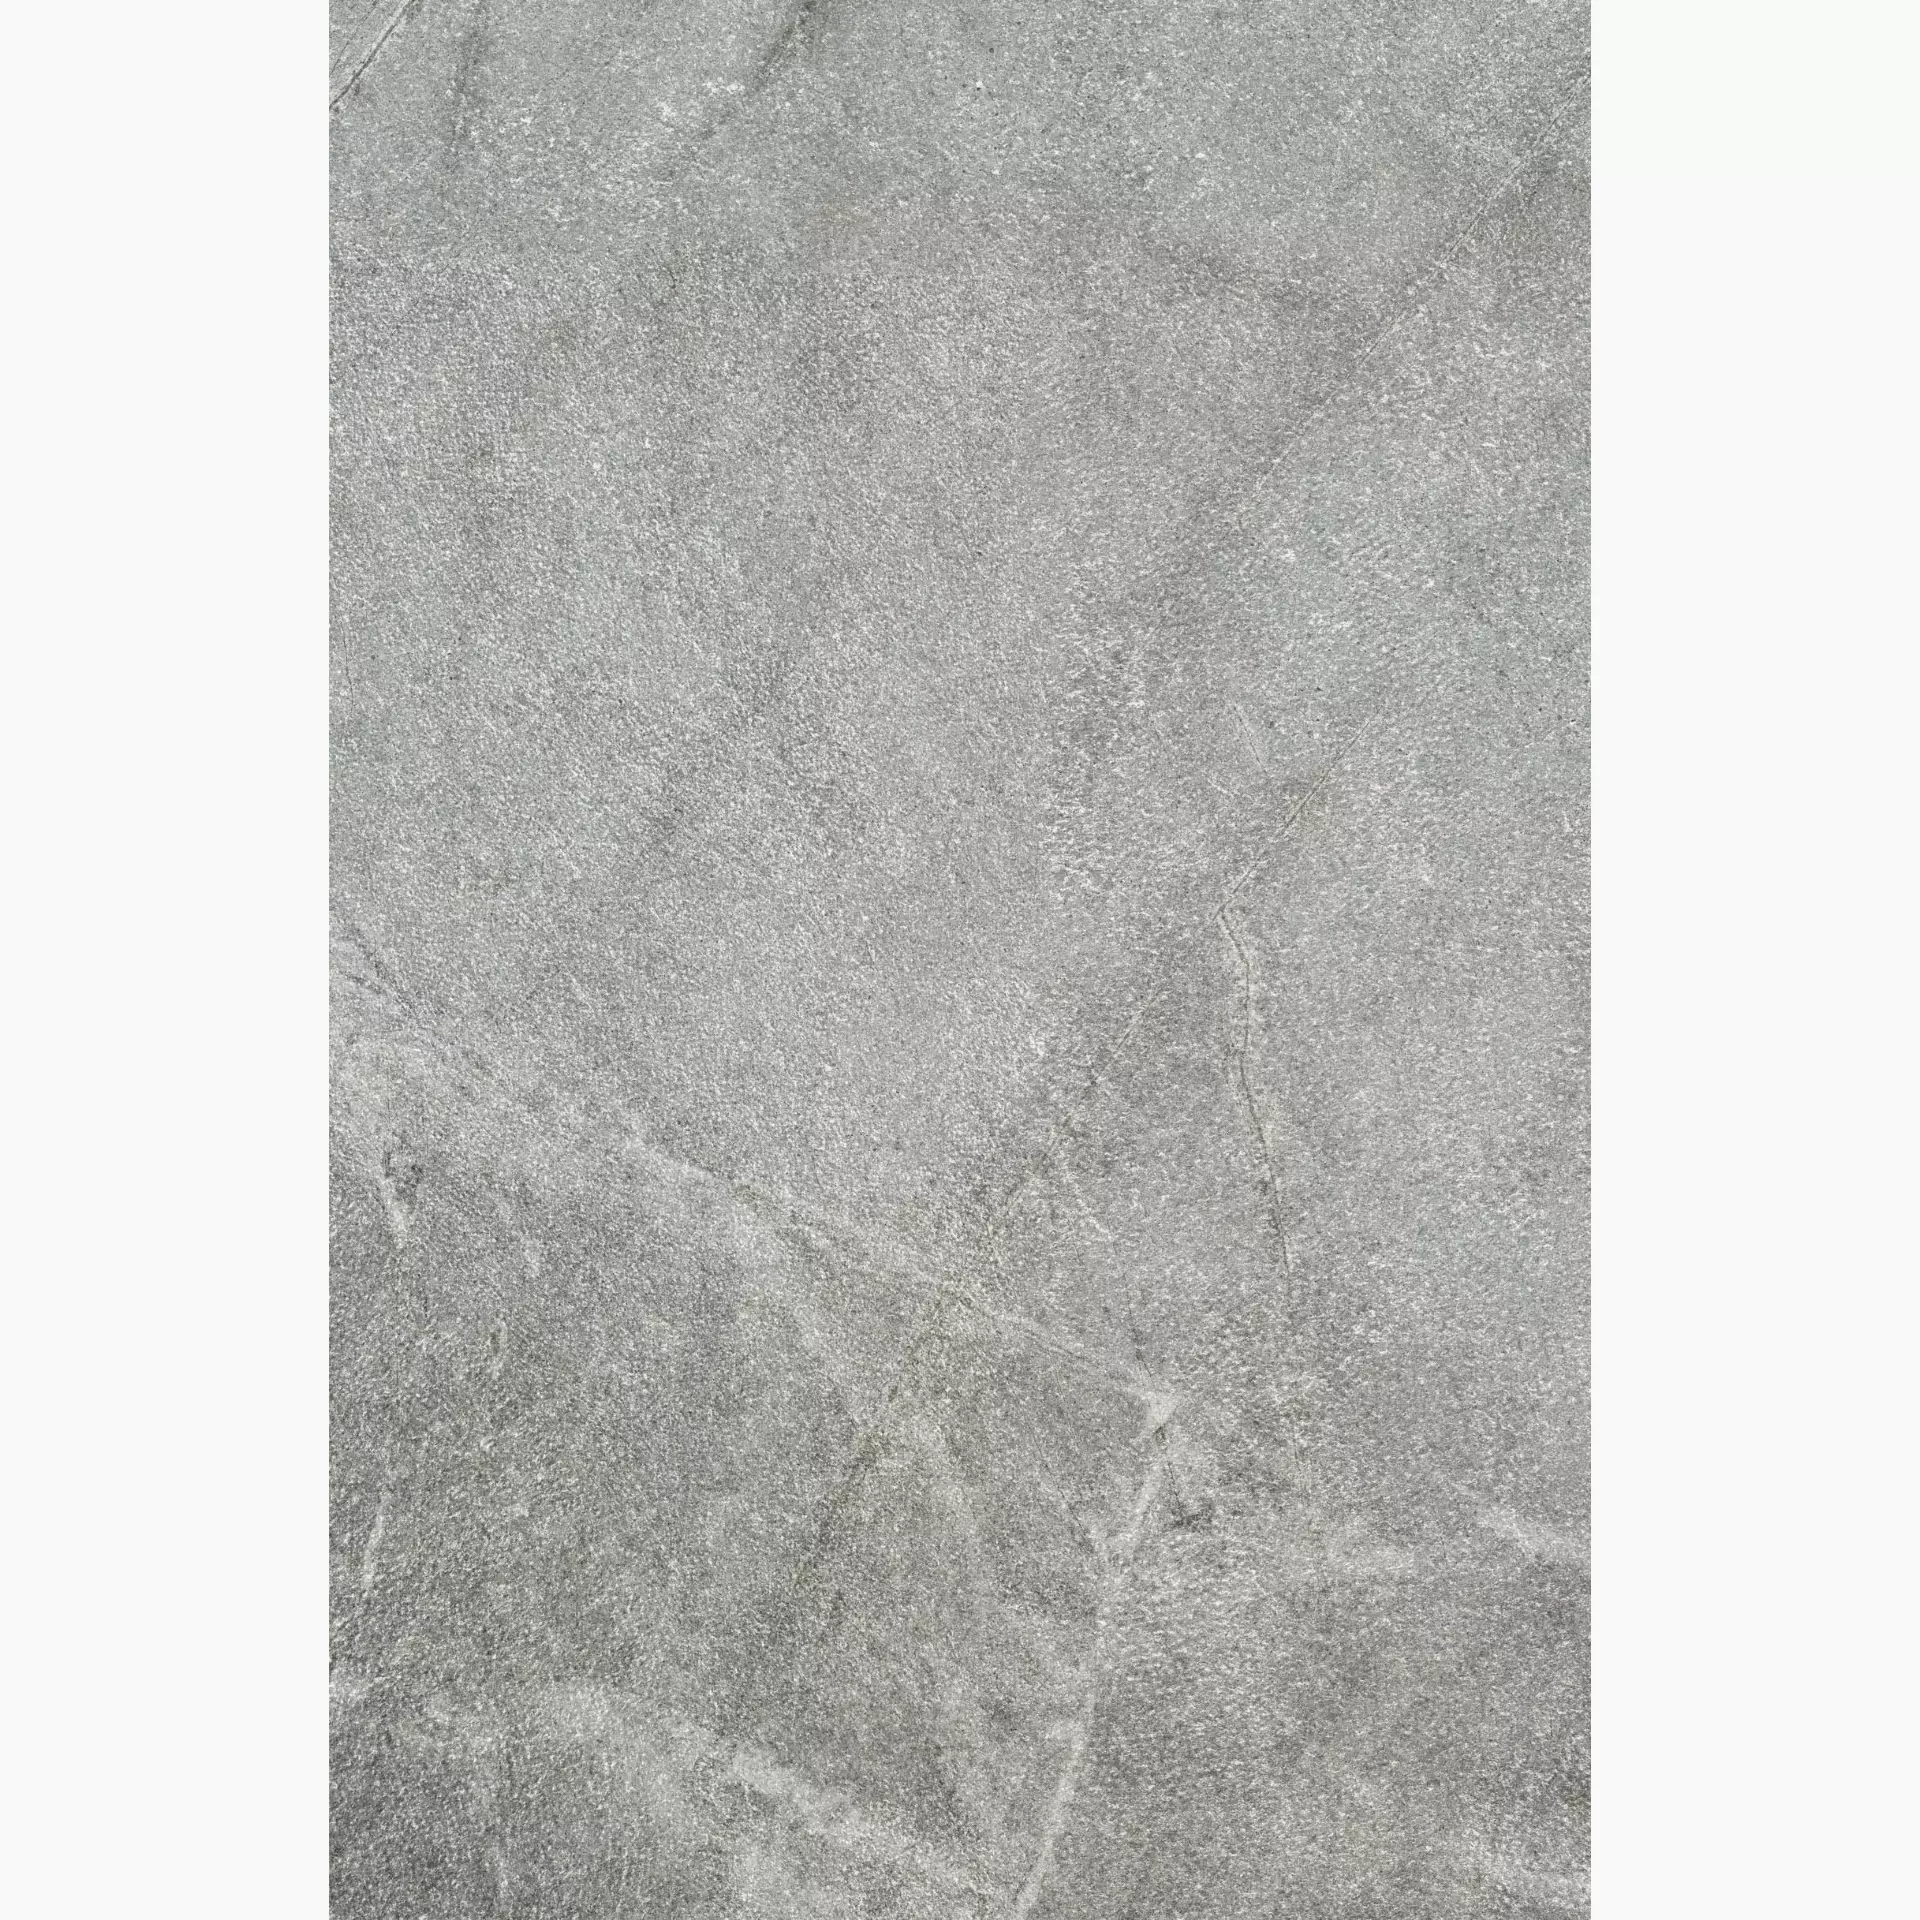 ABK Out.20 Atlantis Grey Hammered Outdoor PF60007174 60x90cm rectified 20mm